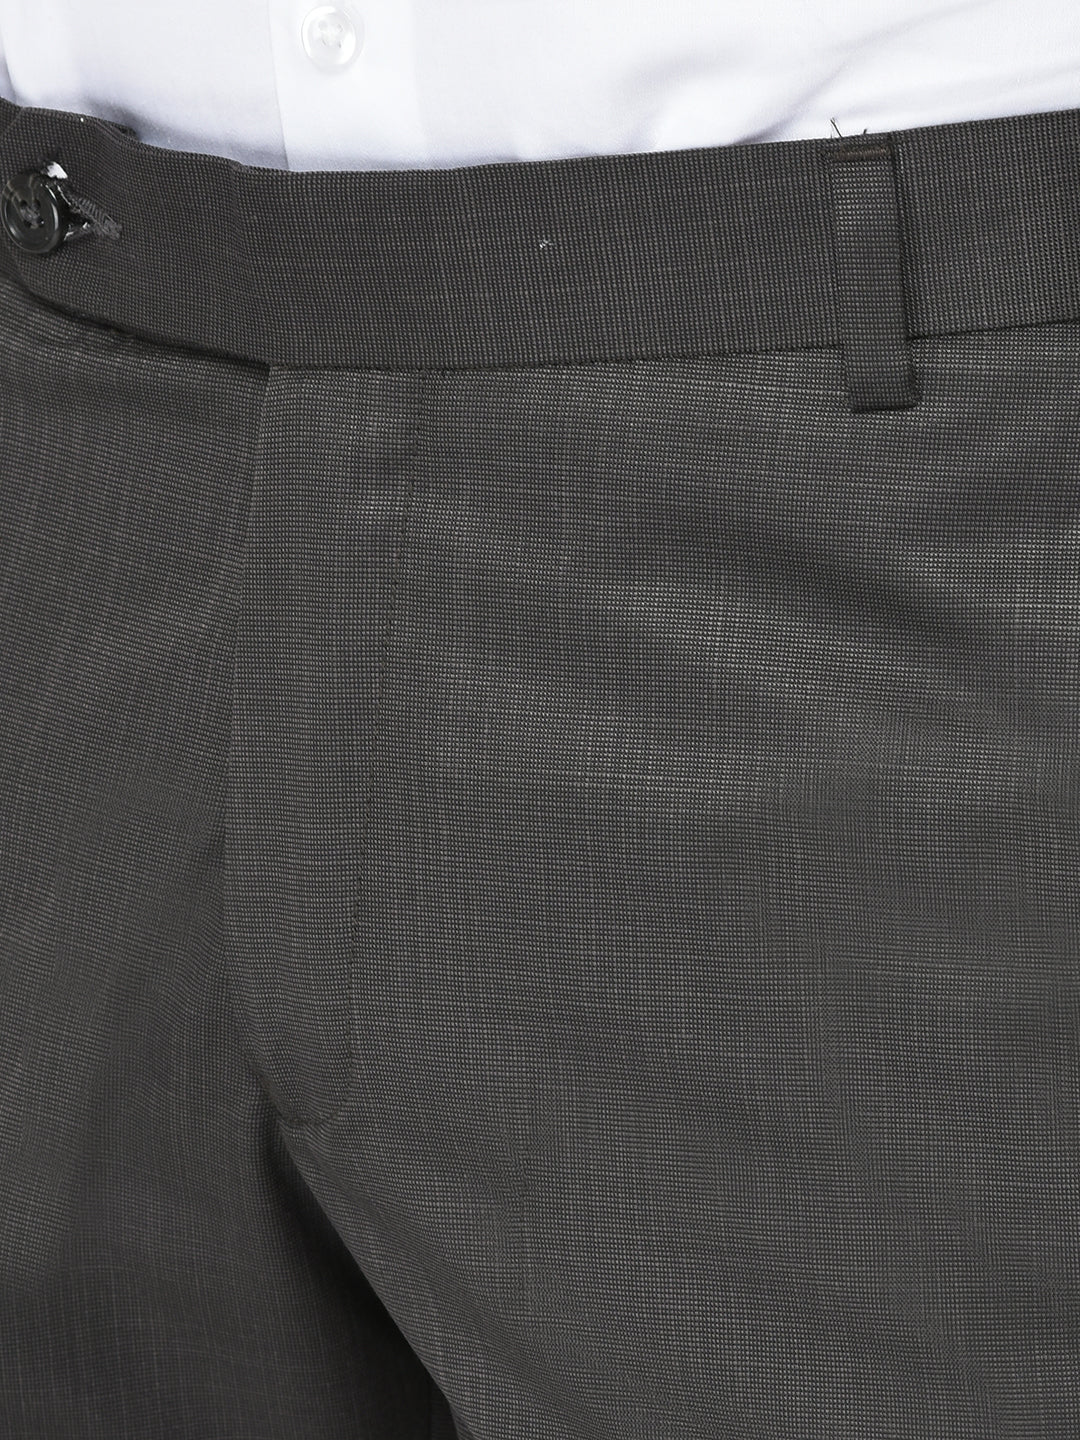 Buy Green Trousers & Pants for Men by Cobb Online | Ajio.com